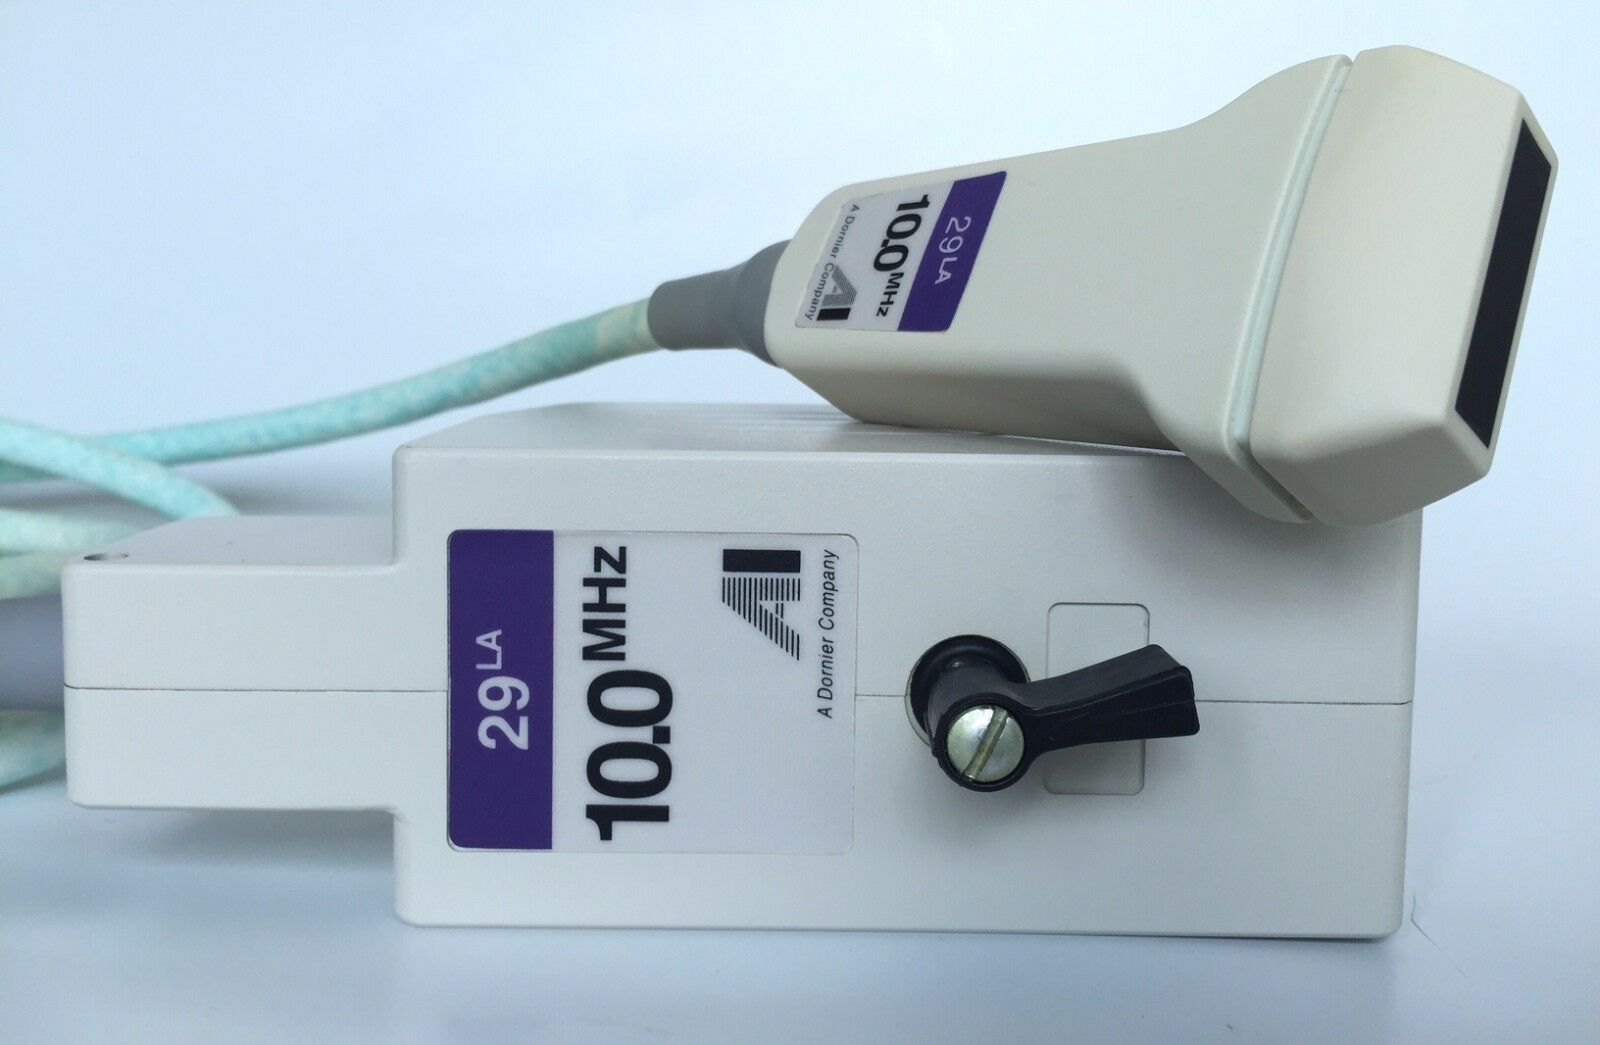 ACOUSTIC IMAGING 29LA 10.0 MHz.ULTRASOUND TRANSDUCER PROBE Used DIAGNOSTIC ULTRASOUND MACHINES FOR SALE